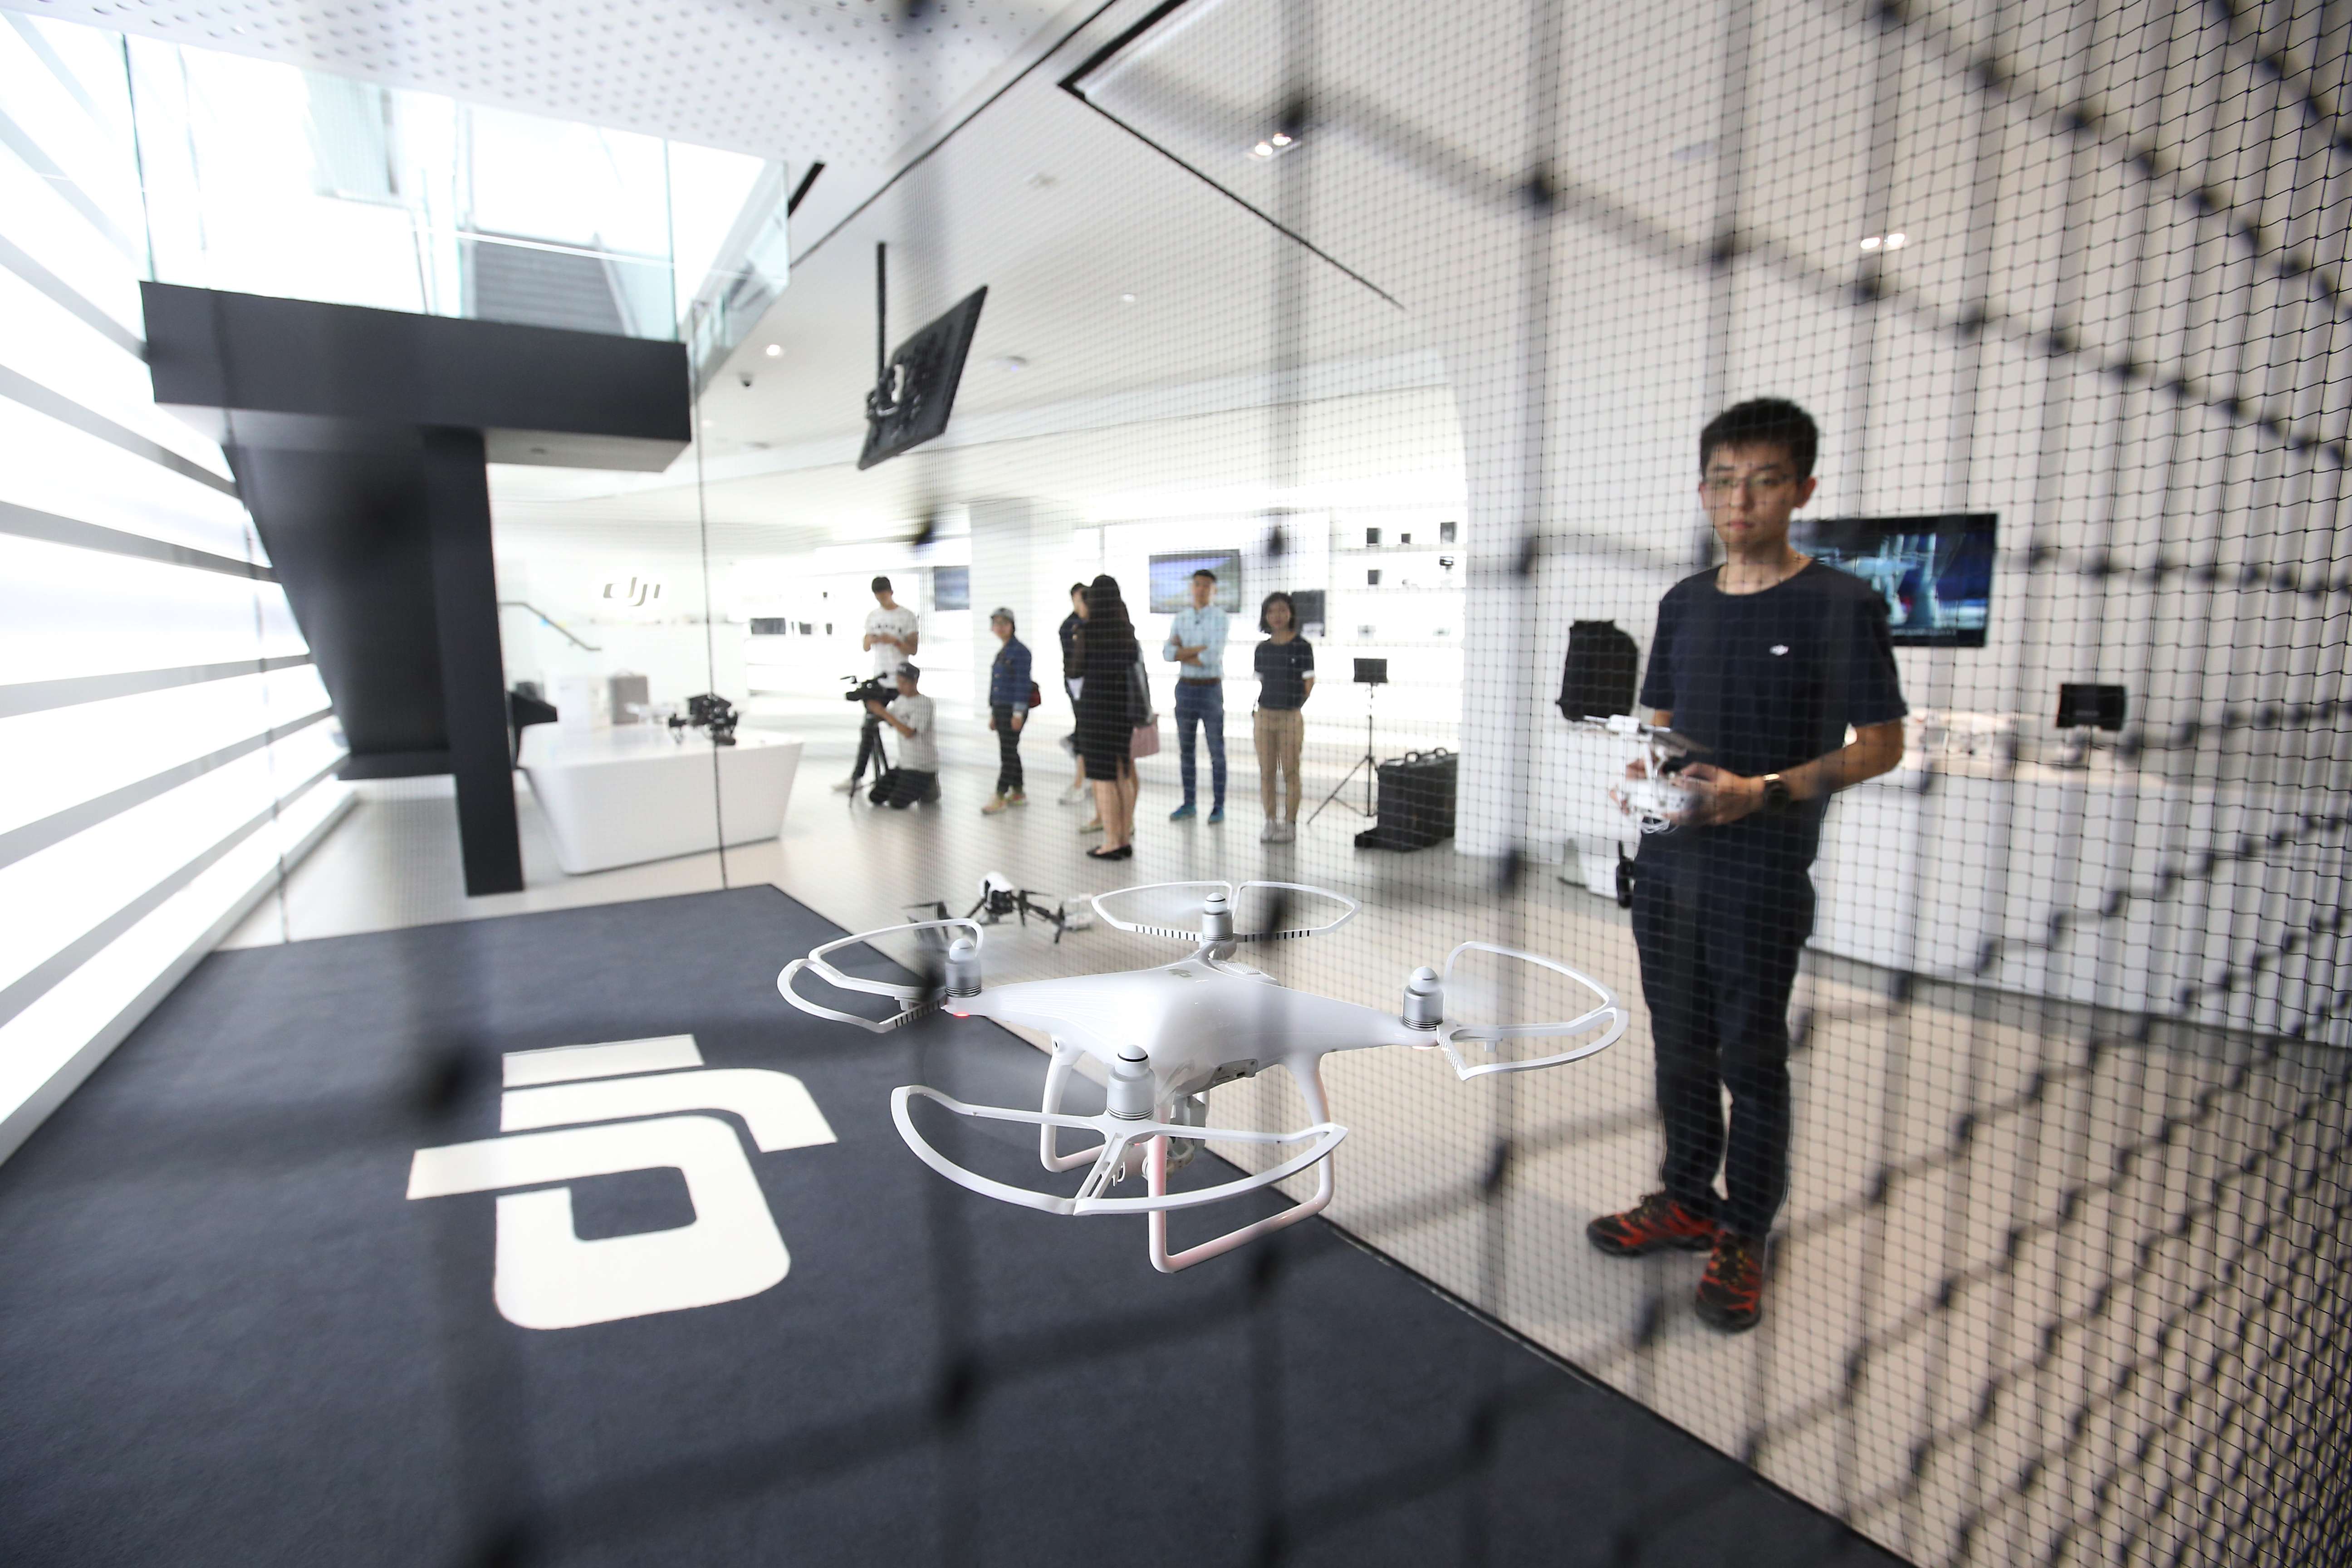 DJI’s new store in Causeway Bay will allow customers hands-on experience of flying the drones inside a caged area. Photo: Dickson Lee